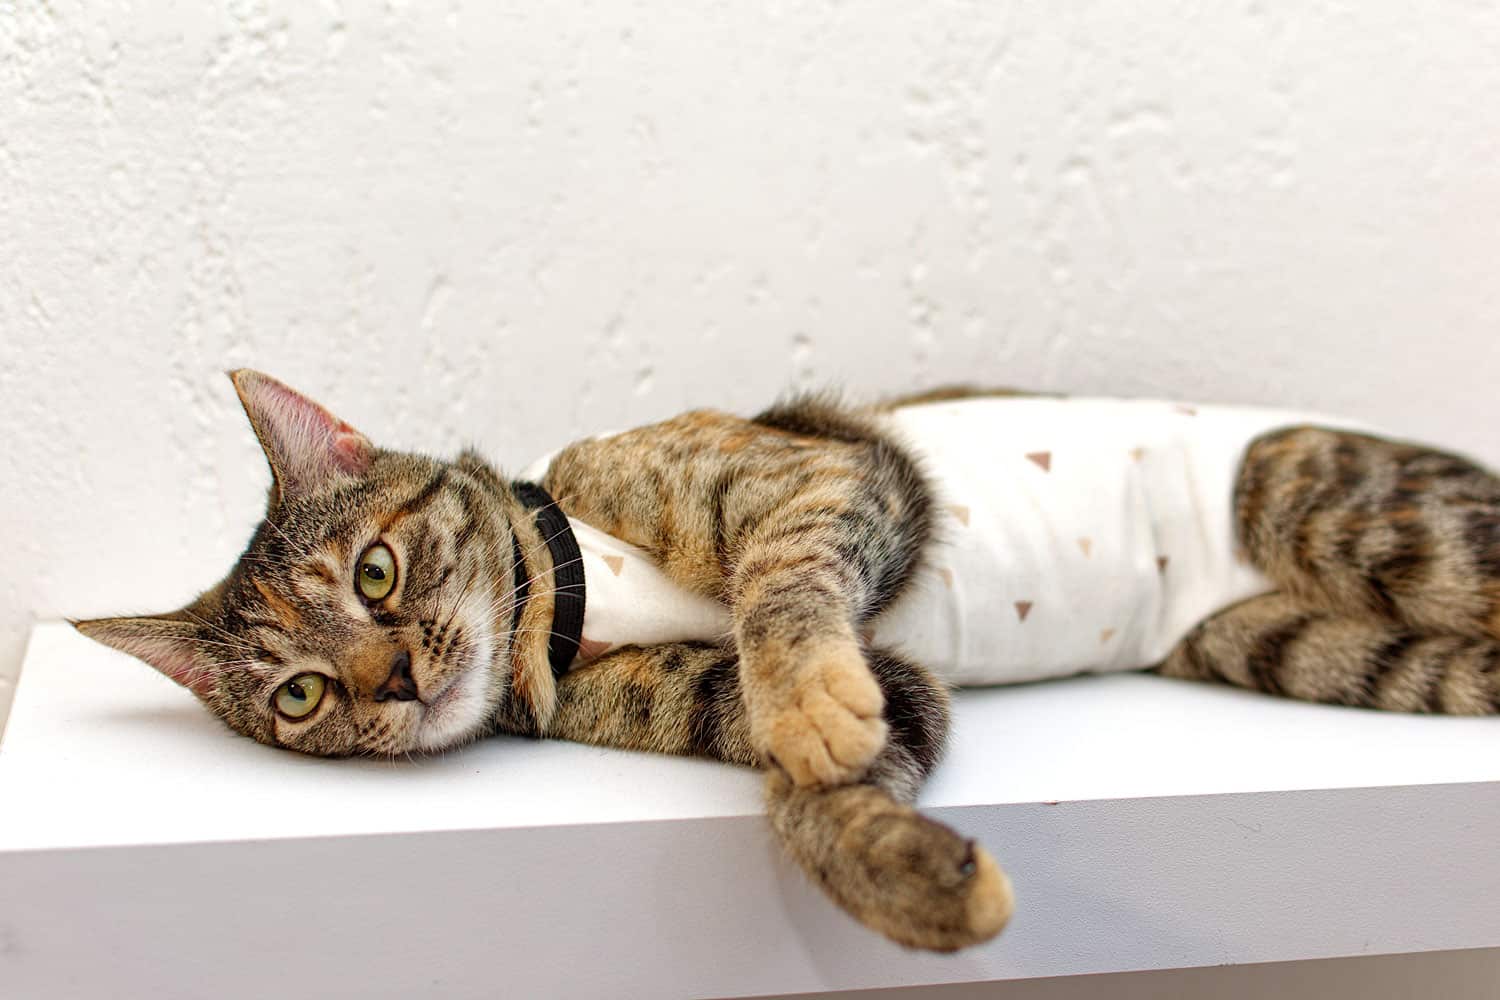 Tabby cat in a medical blanket after surgery. Kitten neutering, protective suit.
